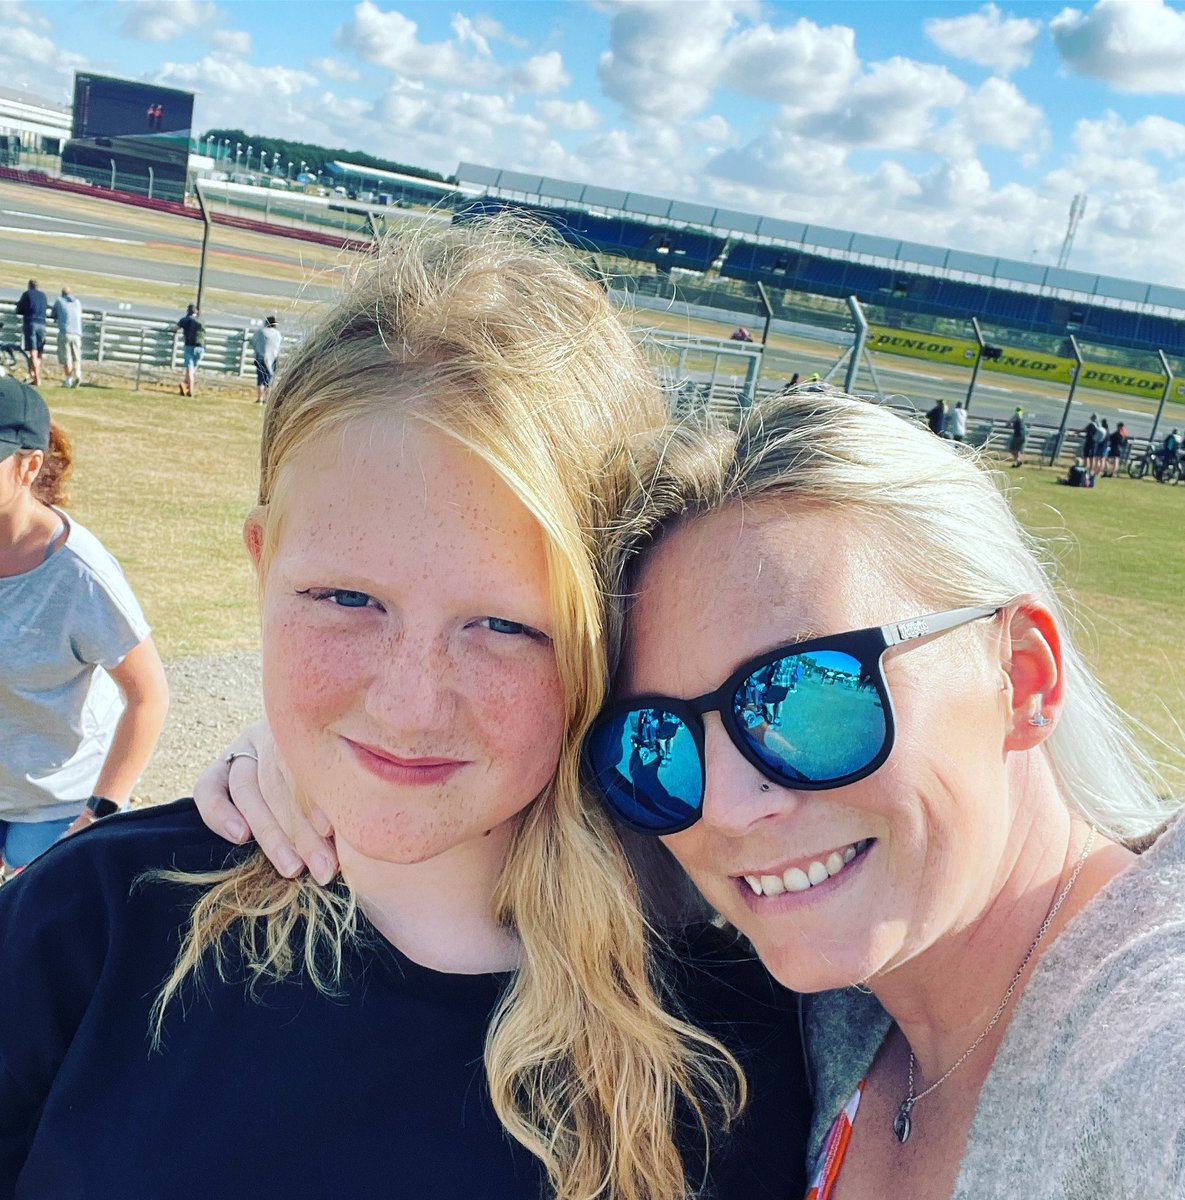 Made it to silverstone for the #MotoGP 🏍😍